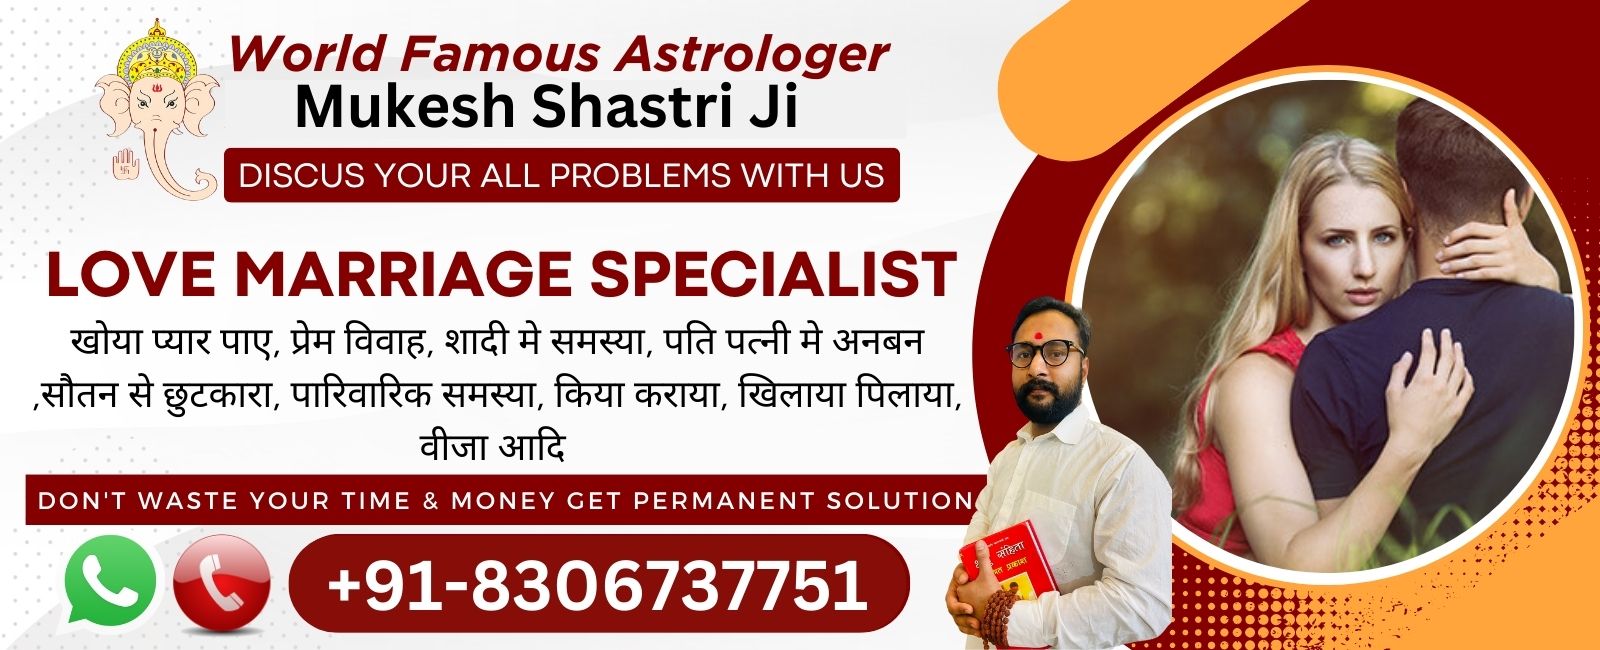 You are currently viewing Free 5 Minute Astrology in Hindi | फ्री 5 मिनट ज्योतिष हिंदी में